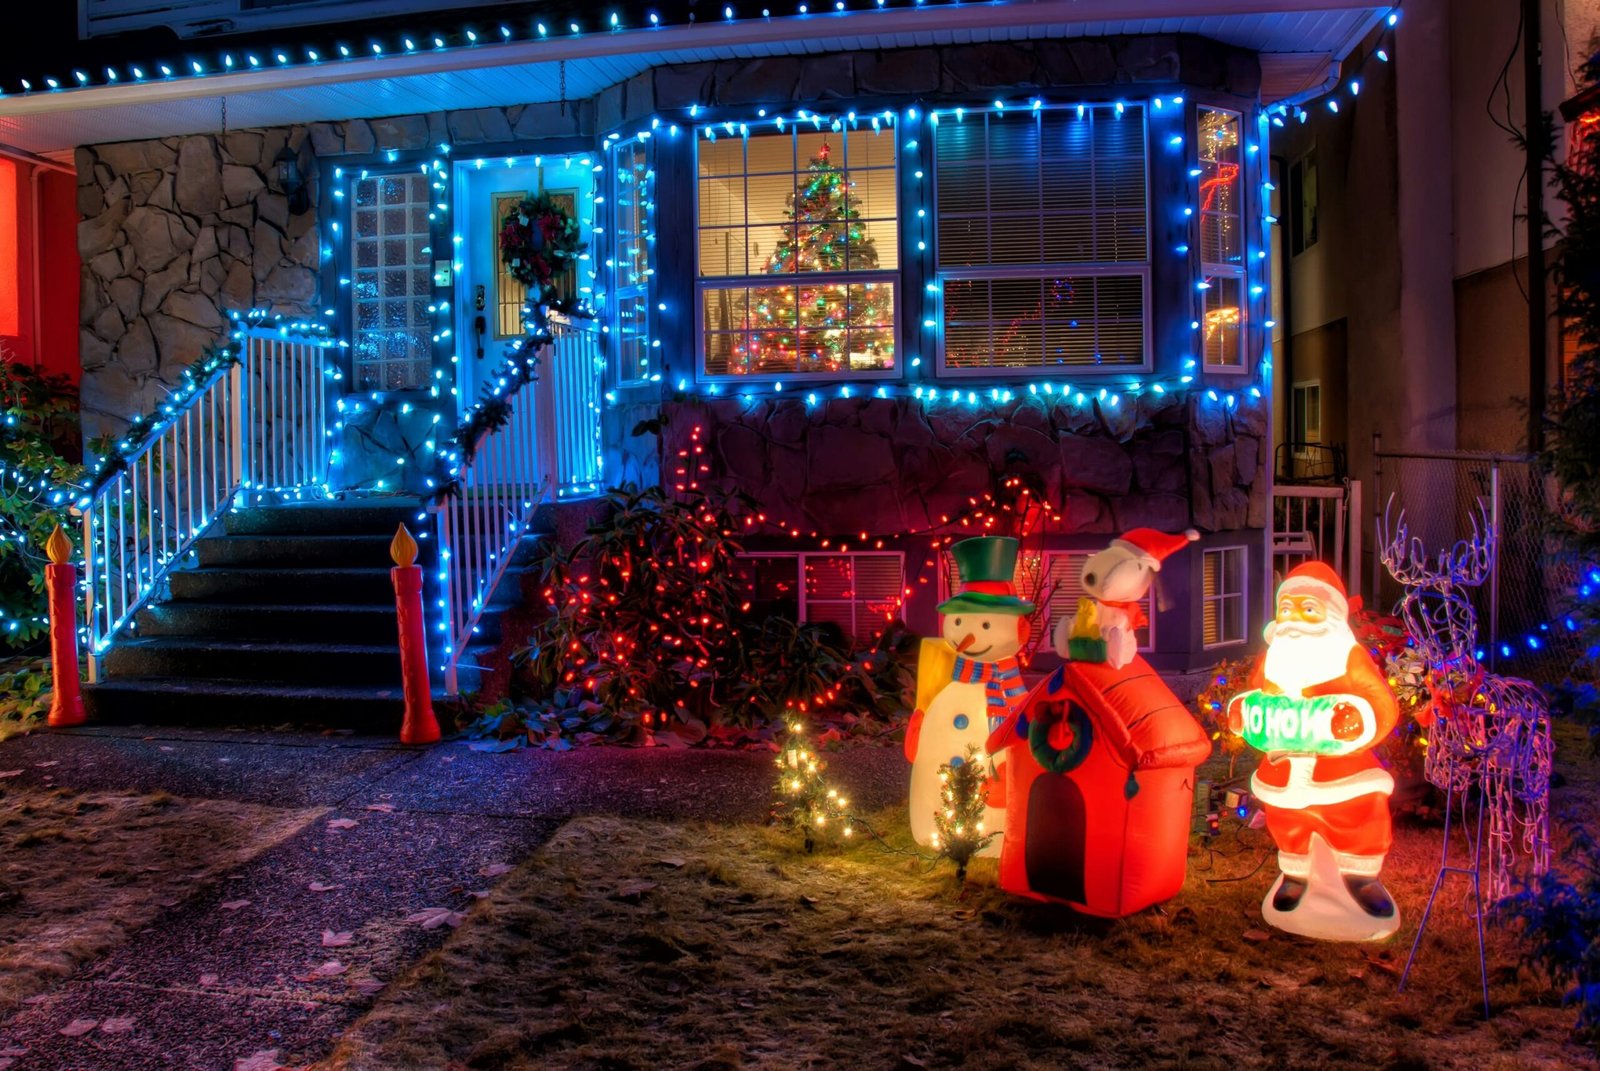 House exterior decorated for Christmas.